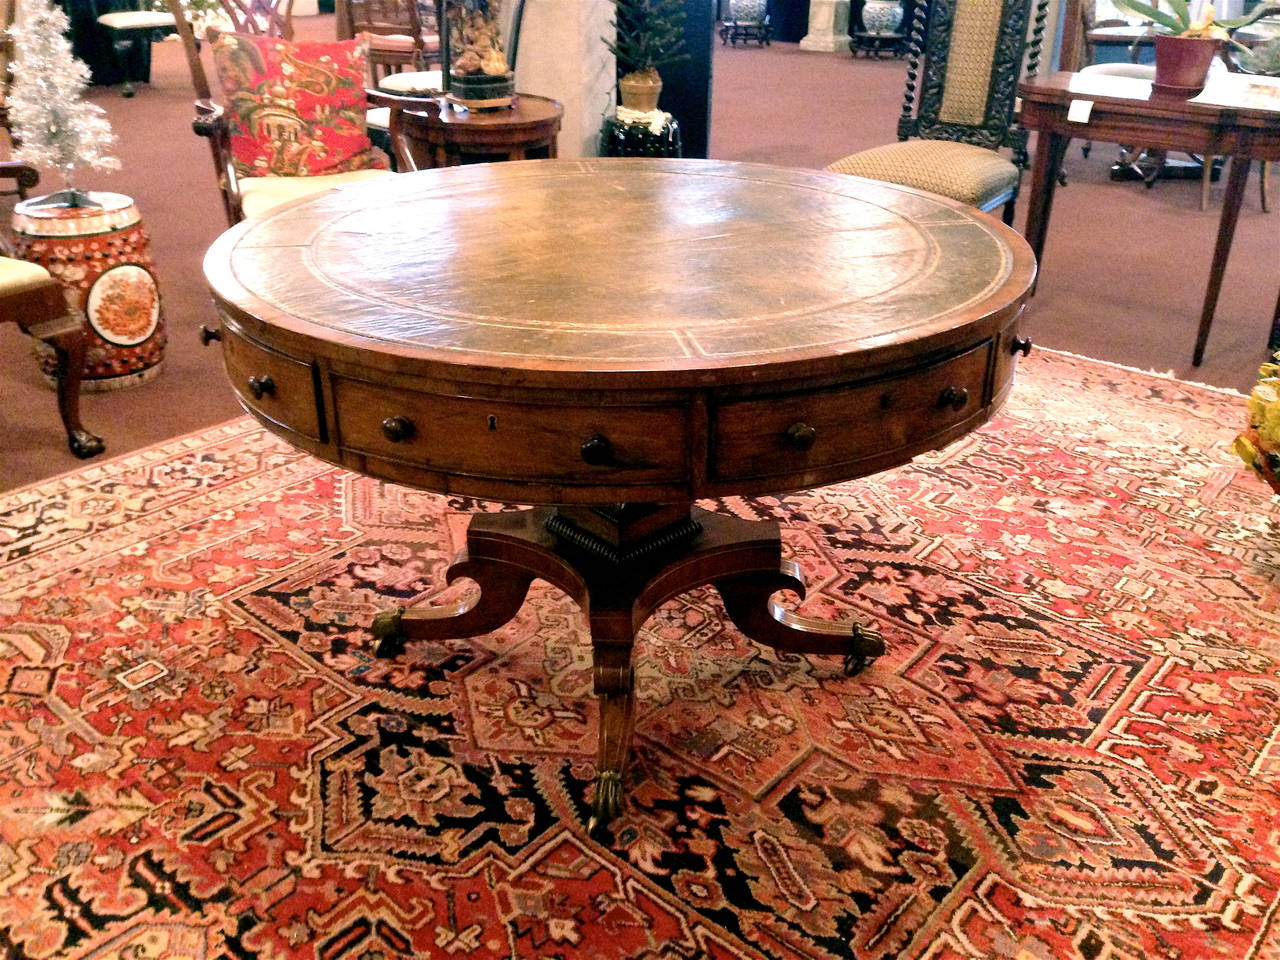 Exceptional English Regency rent table. Bearing drawers beneath. With a leather top bearing gilt embellishments. With brass paw feet. Raised on casters. Swivel top.